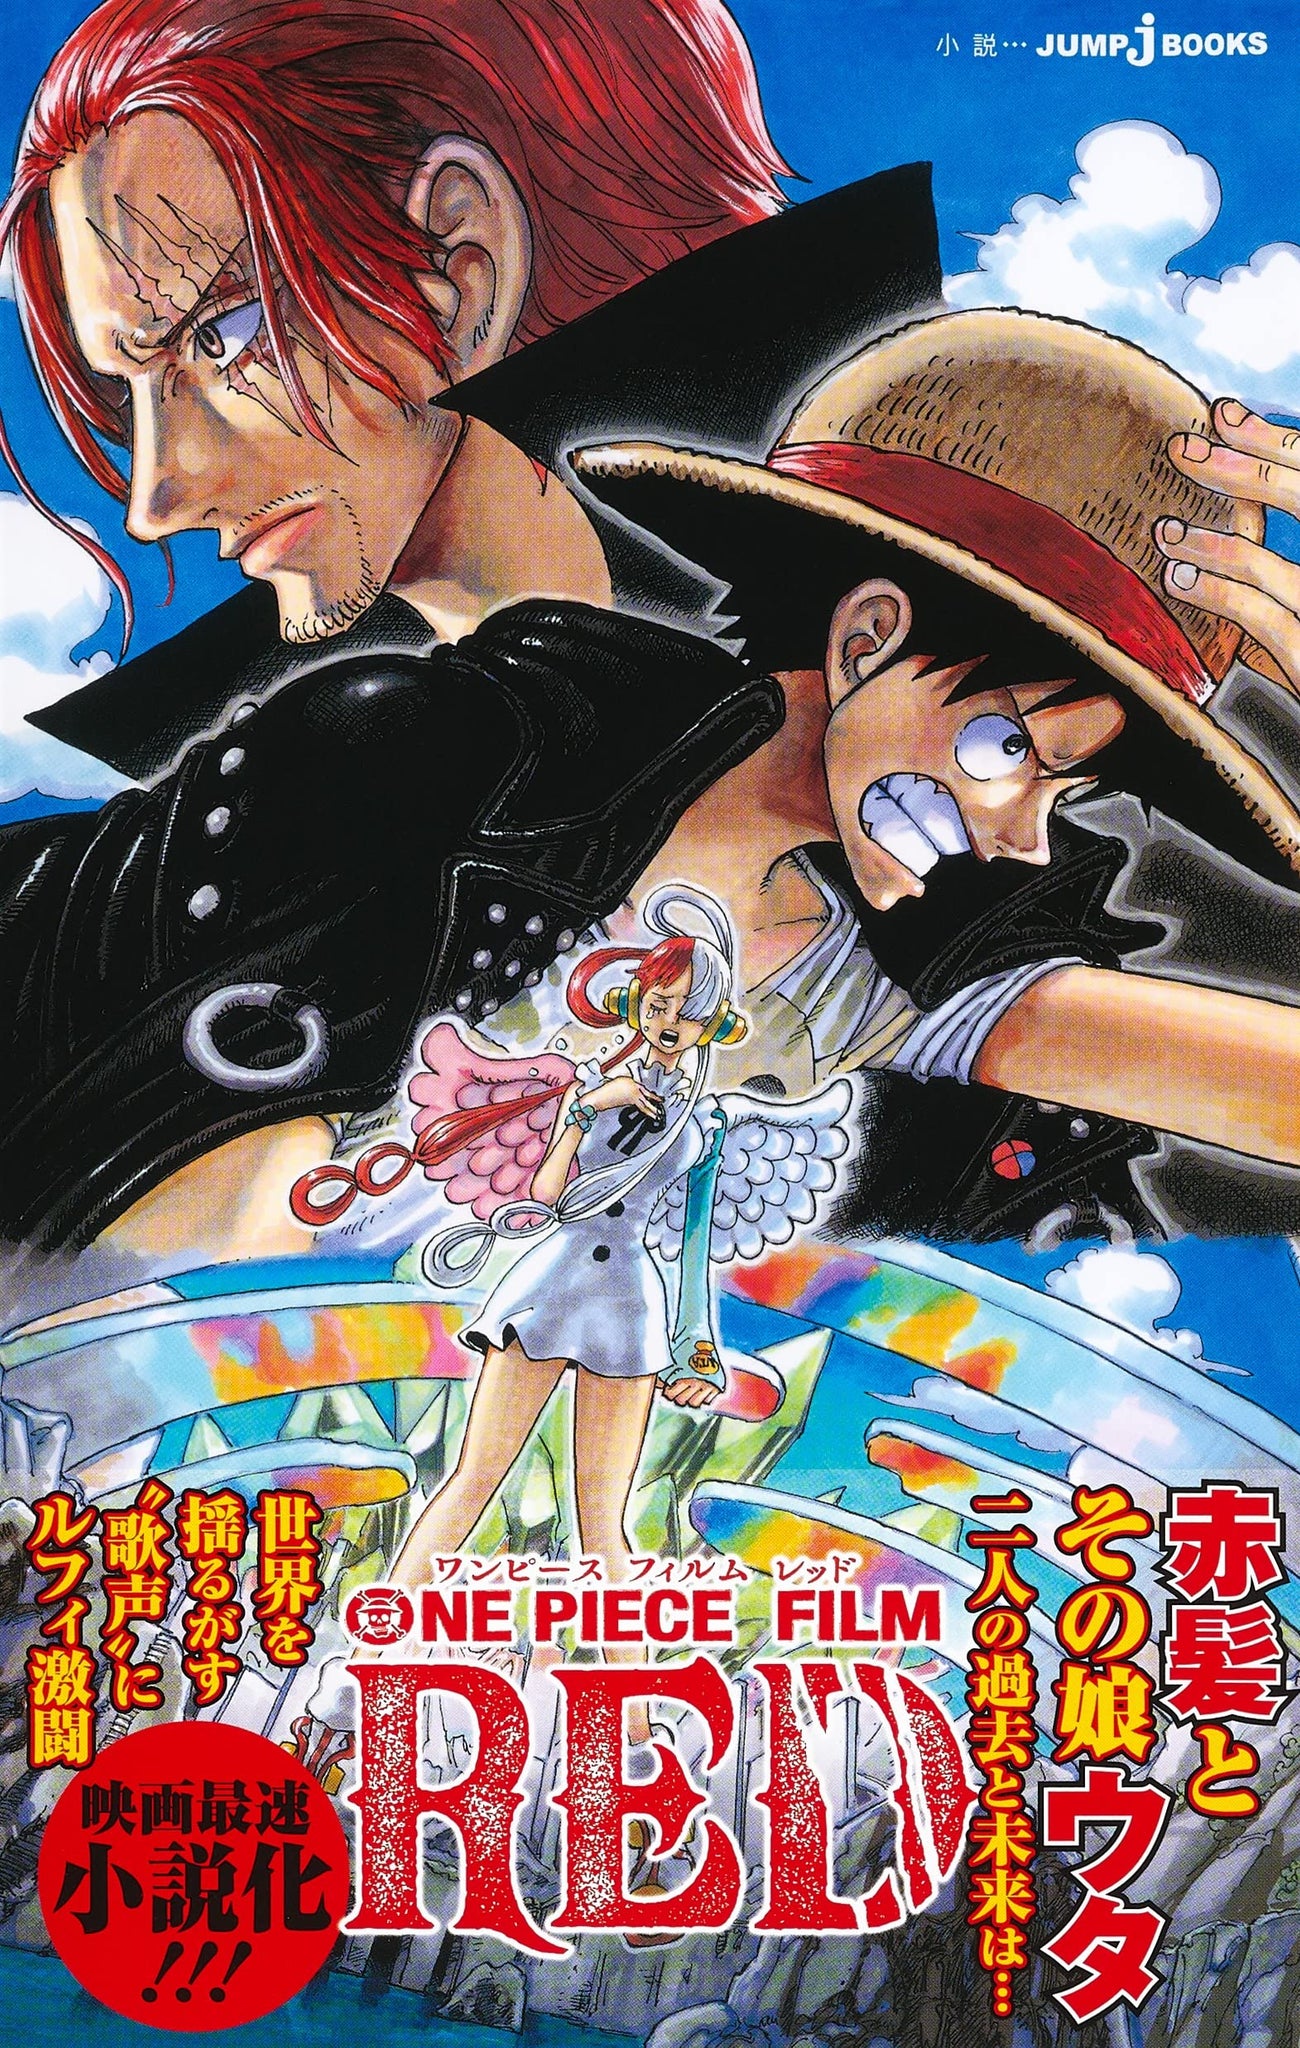 One Piece tome 103 Manga première edition couverture collector